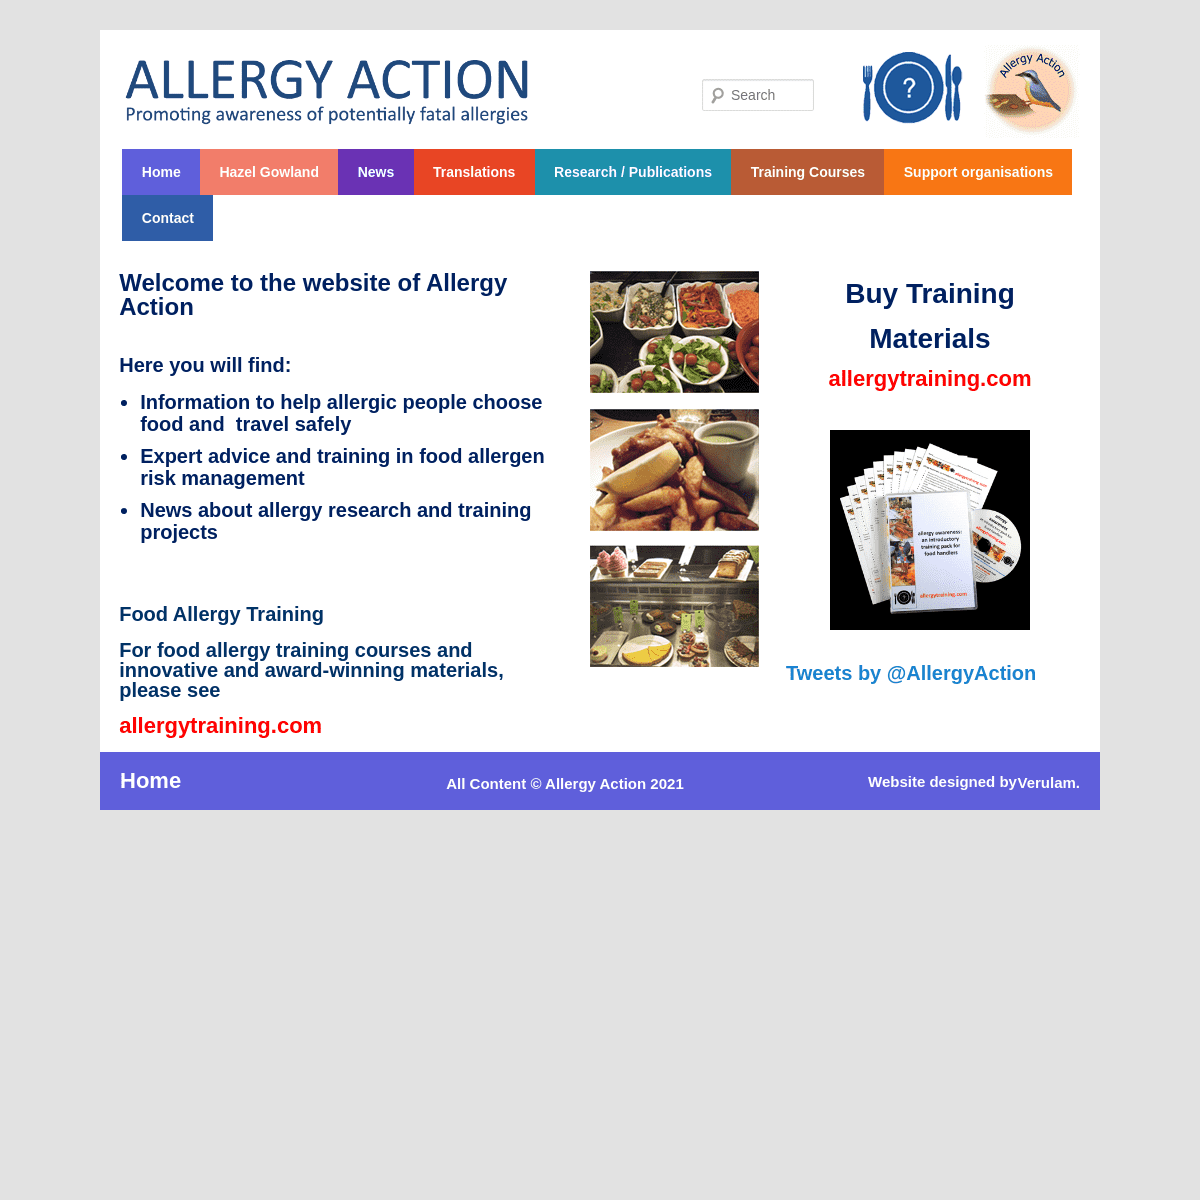 A complete backup of https://allergyaction.org